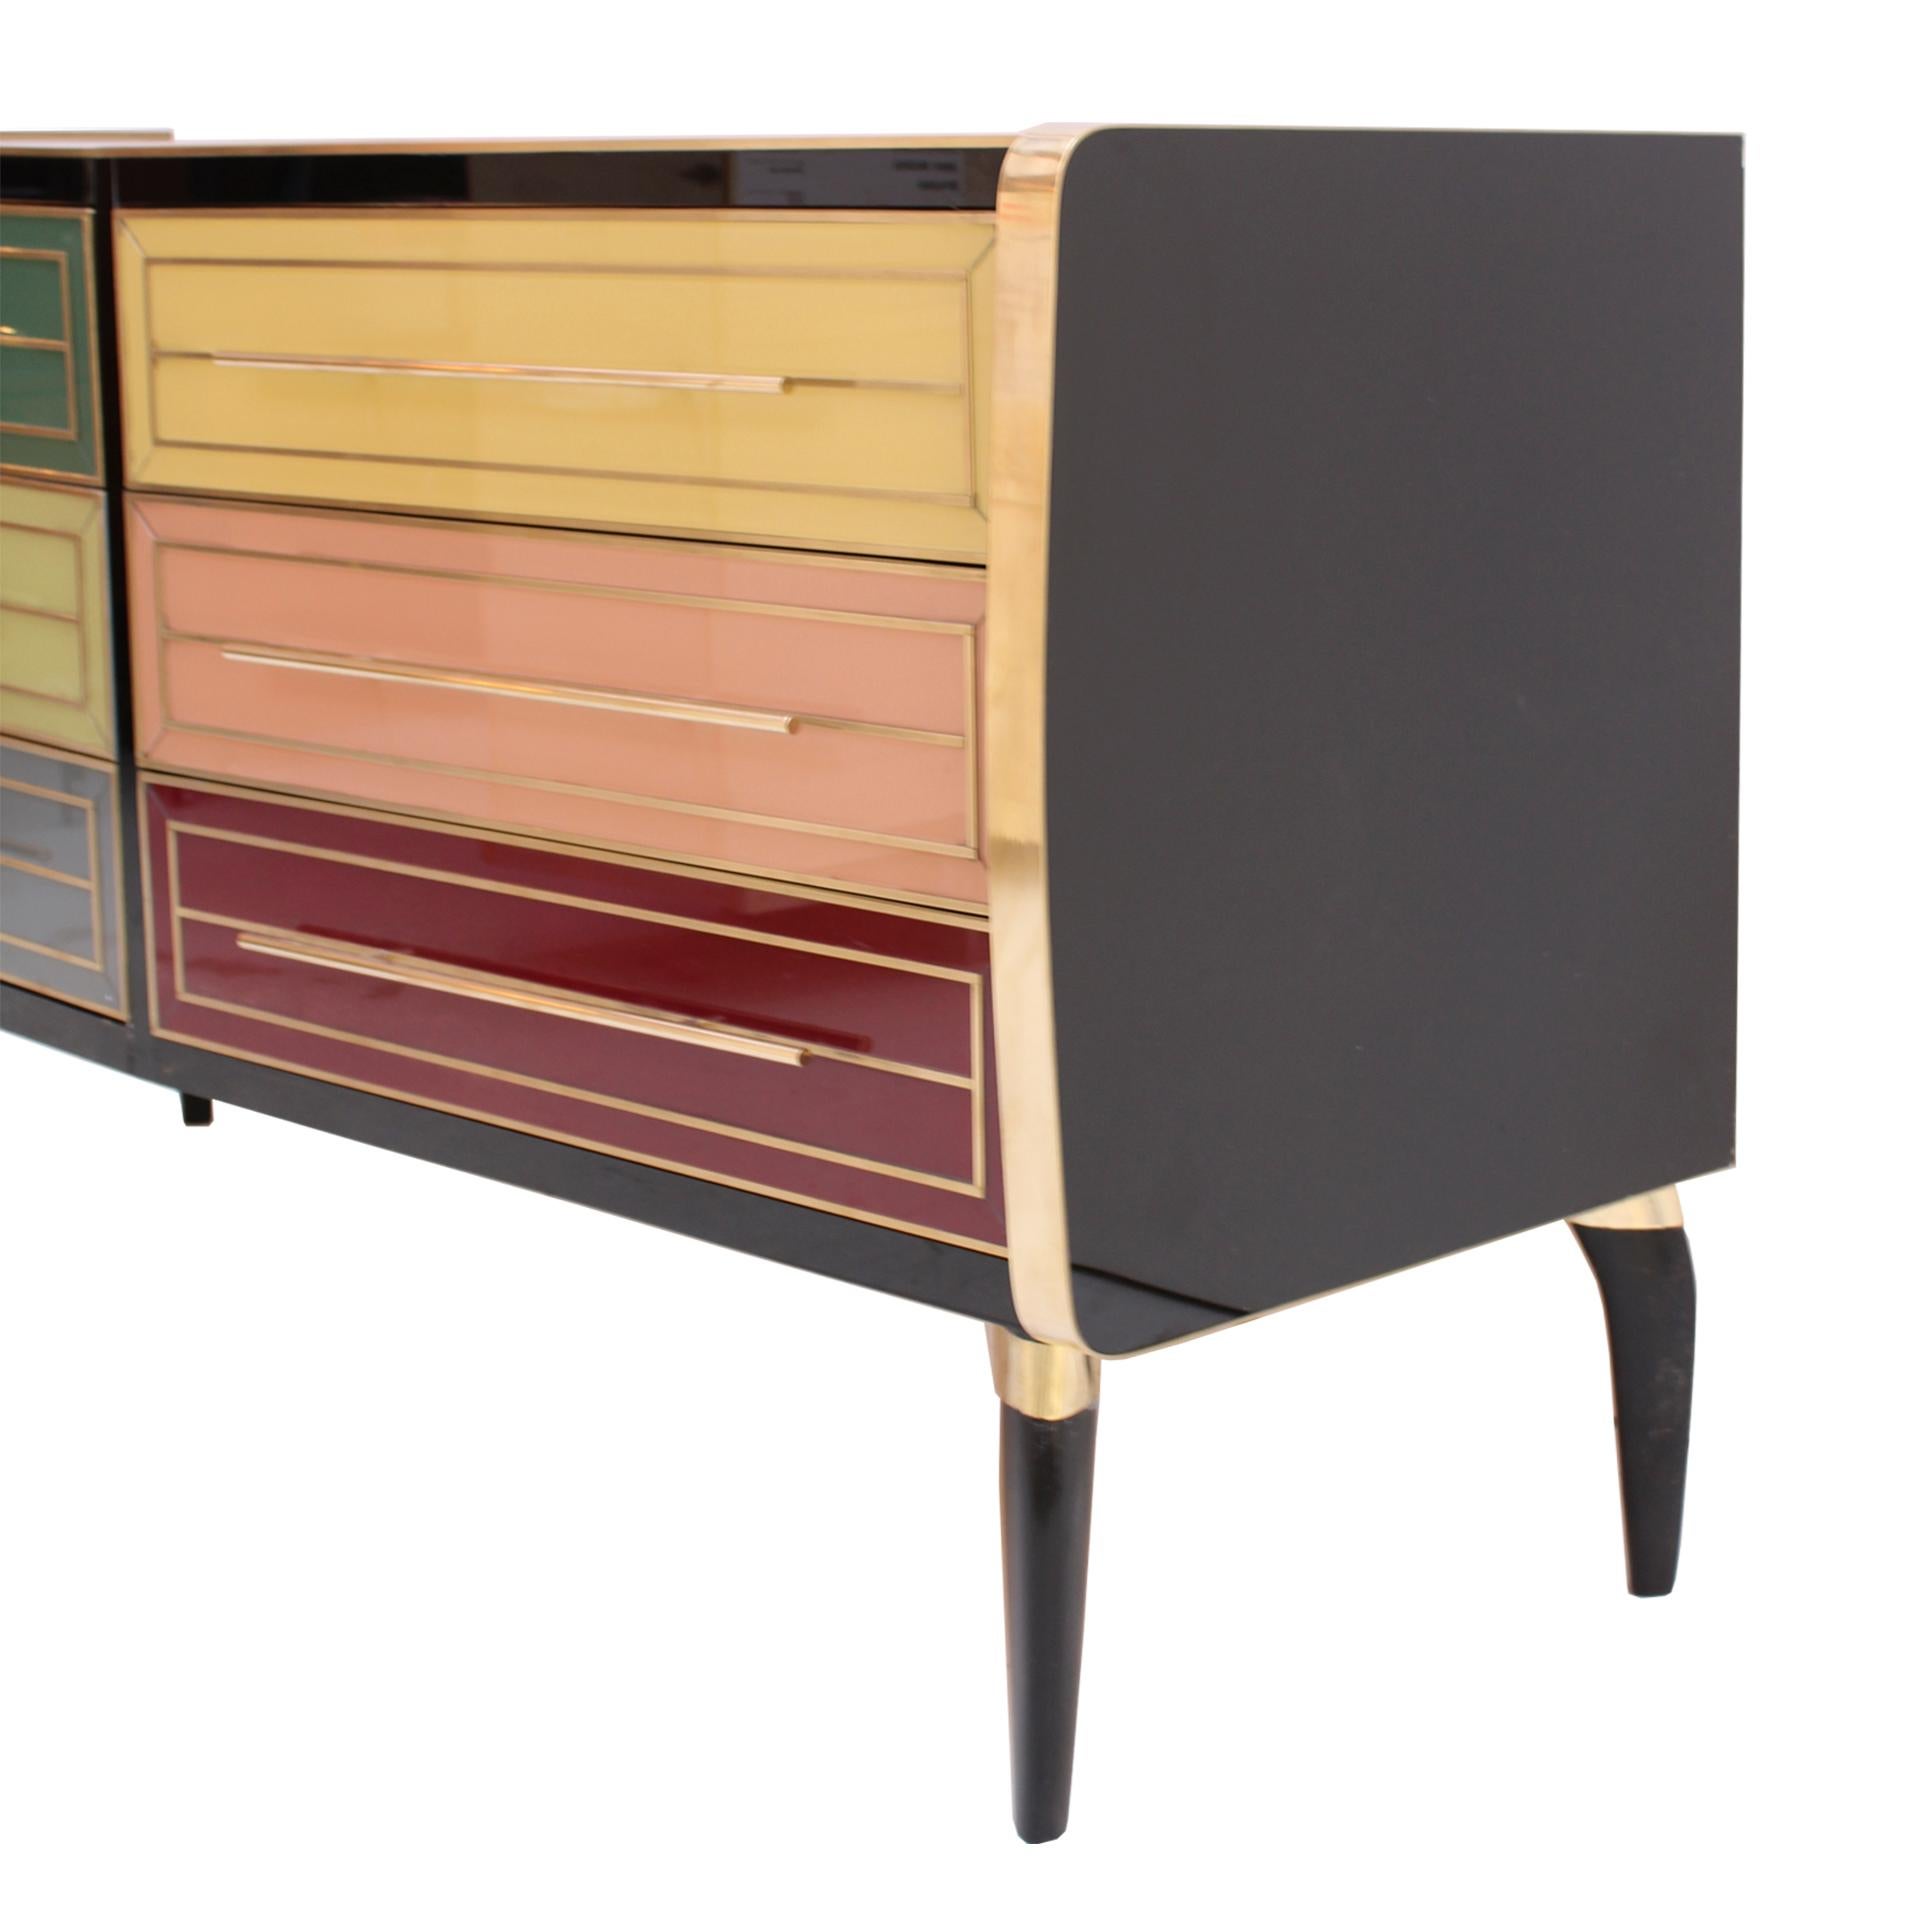 Mid-20th Century Mid-Century Modern Solid Wood and Colored Glass Italian Sideboard For Sale